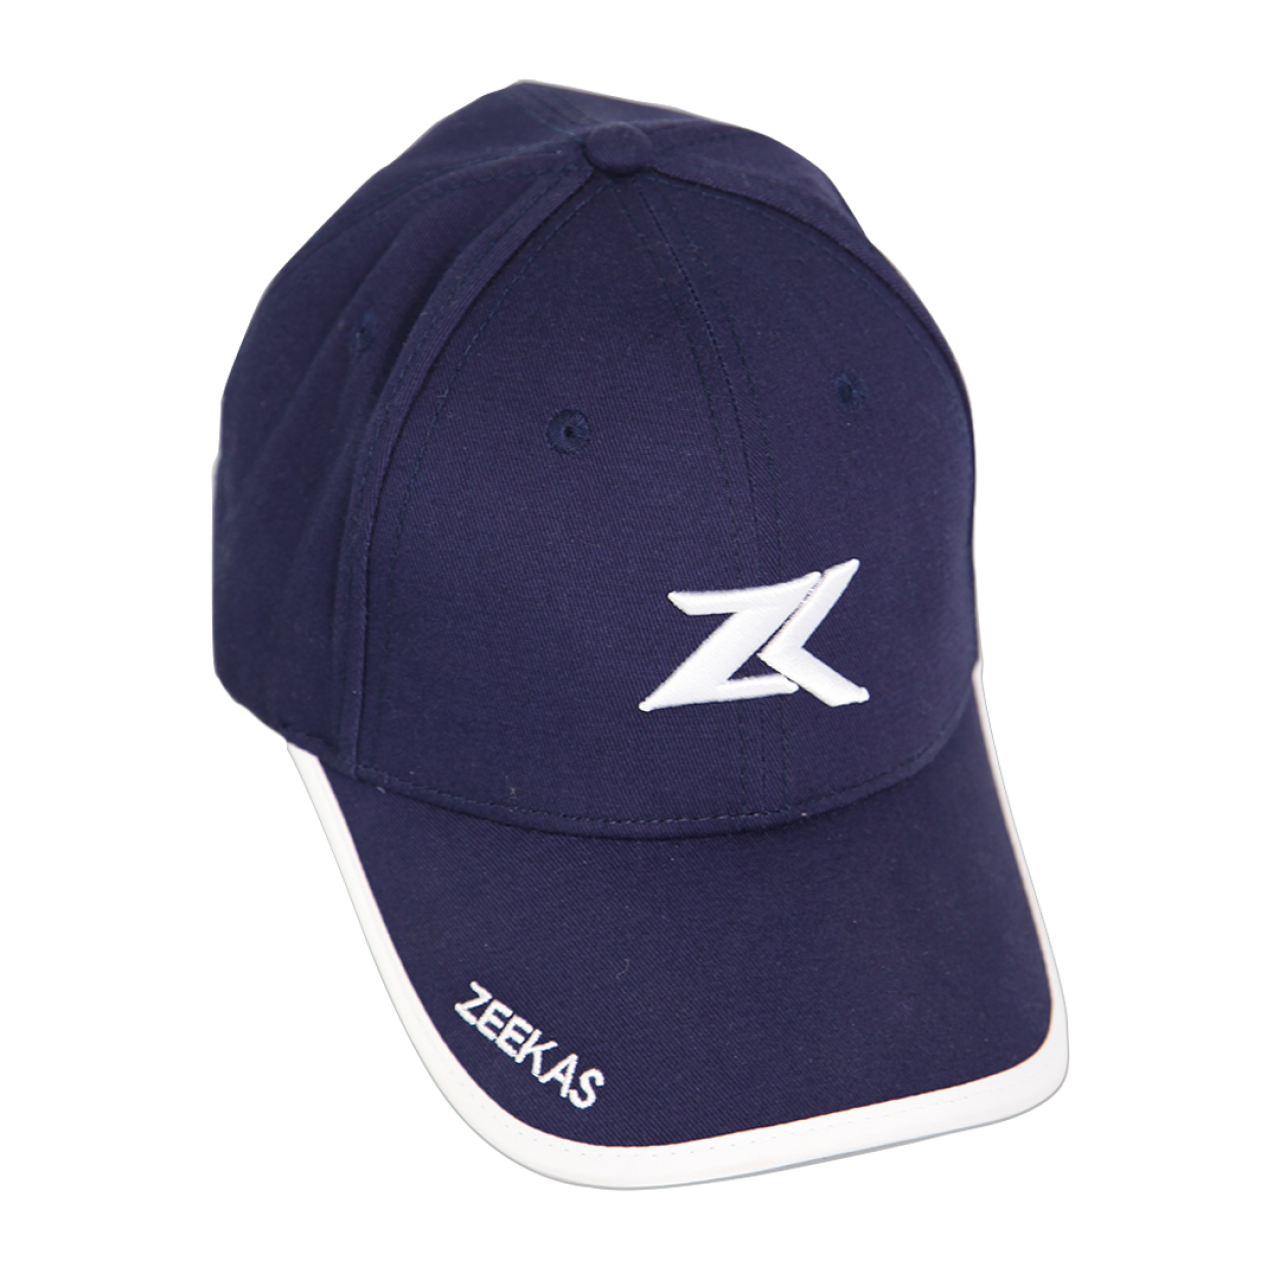 Zeekas ZK Navy Blue Baseball Cap with Brand Embroidery Hat For Men and Women